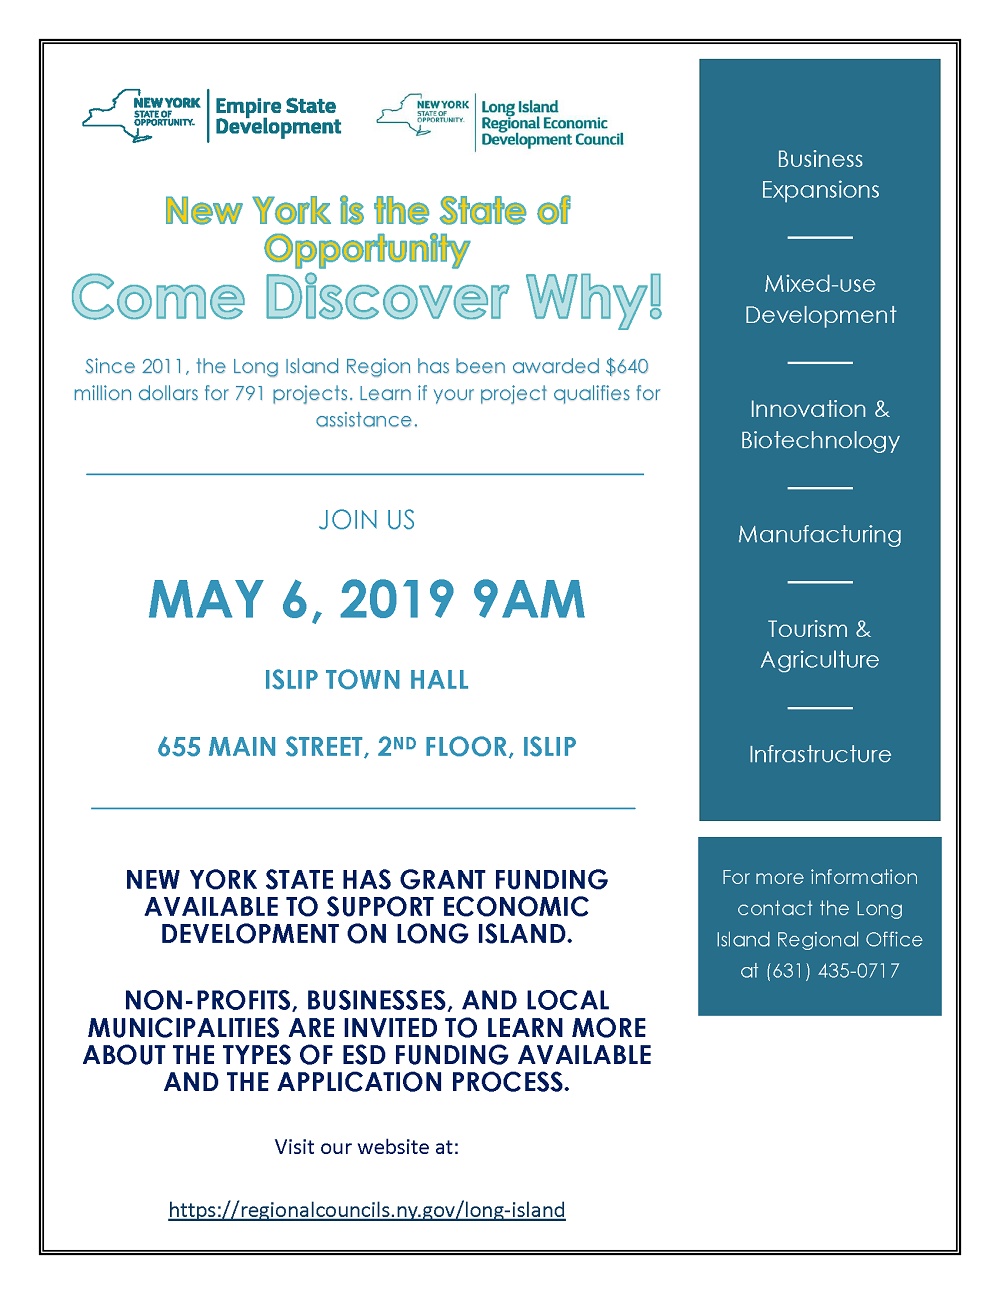 A flyer from New York State announcing the May 6th, 2019 at 9am meeting in Islip Town Hall located at 655 Main Street on the 2nd floor, concerning the NYS grant fundting available to suport economic development on long island. Non-profits, businesses and local municipalities are invited to learn more about the types fo ESD funding available and the application process